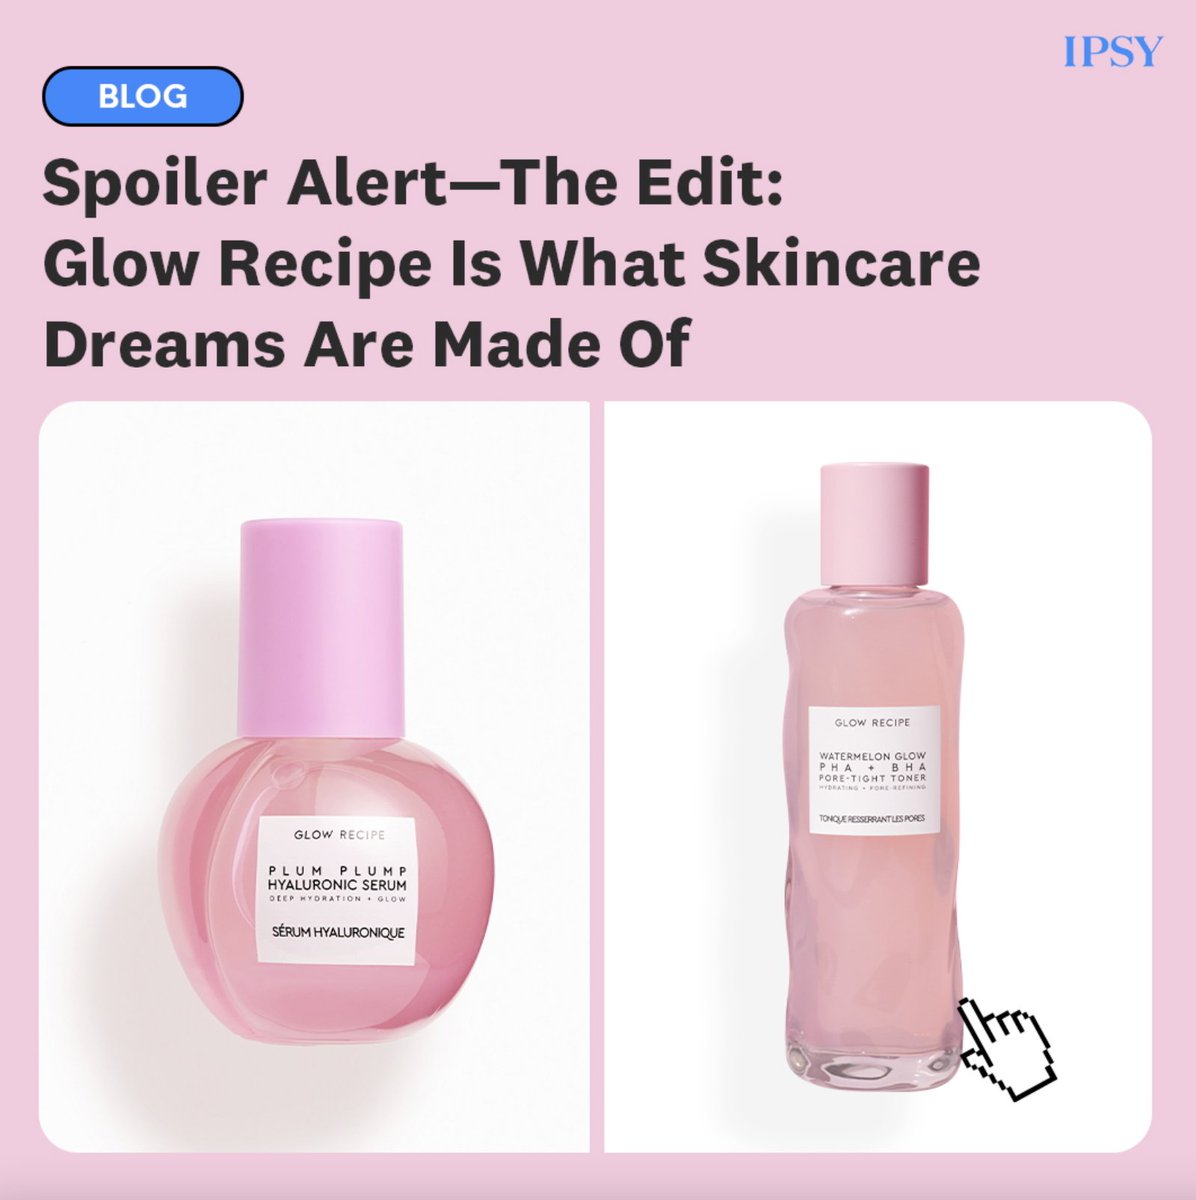 Set your alarm! The Edit: @GlowRecipe is coming to IPSY tomorrow. This exclusive Edit features six cult-favorite Glow Recipe products, plus a trendy makeup bag—all at a price you just won’t find anywhere else. Tap the link in bio for a sneak peek! ipsy.com/blog/glow-reci…